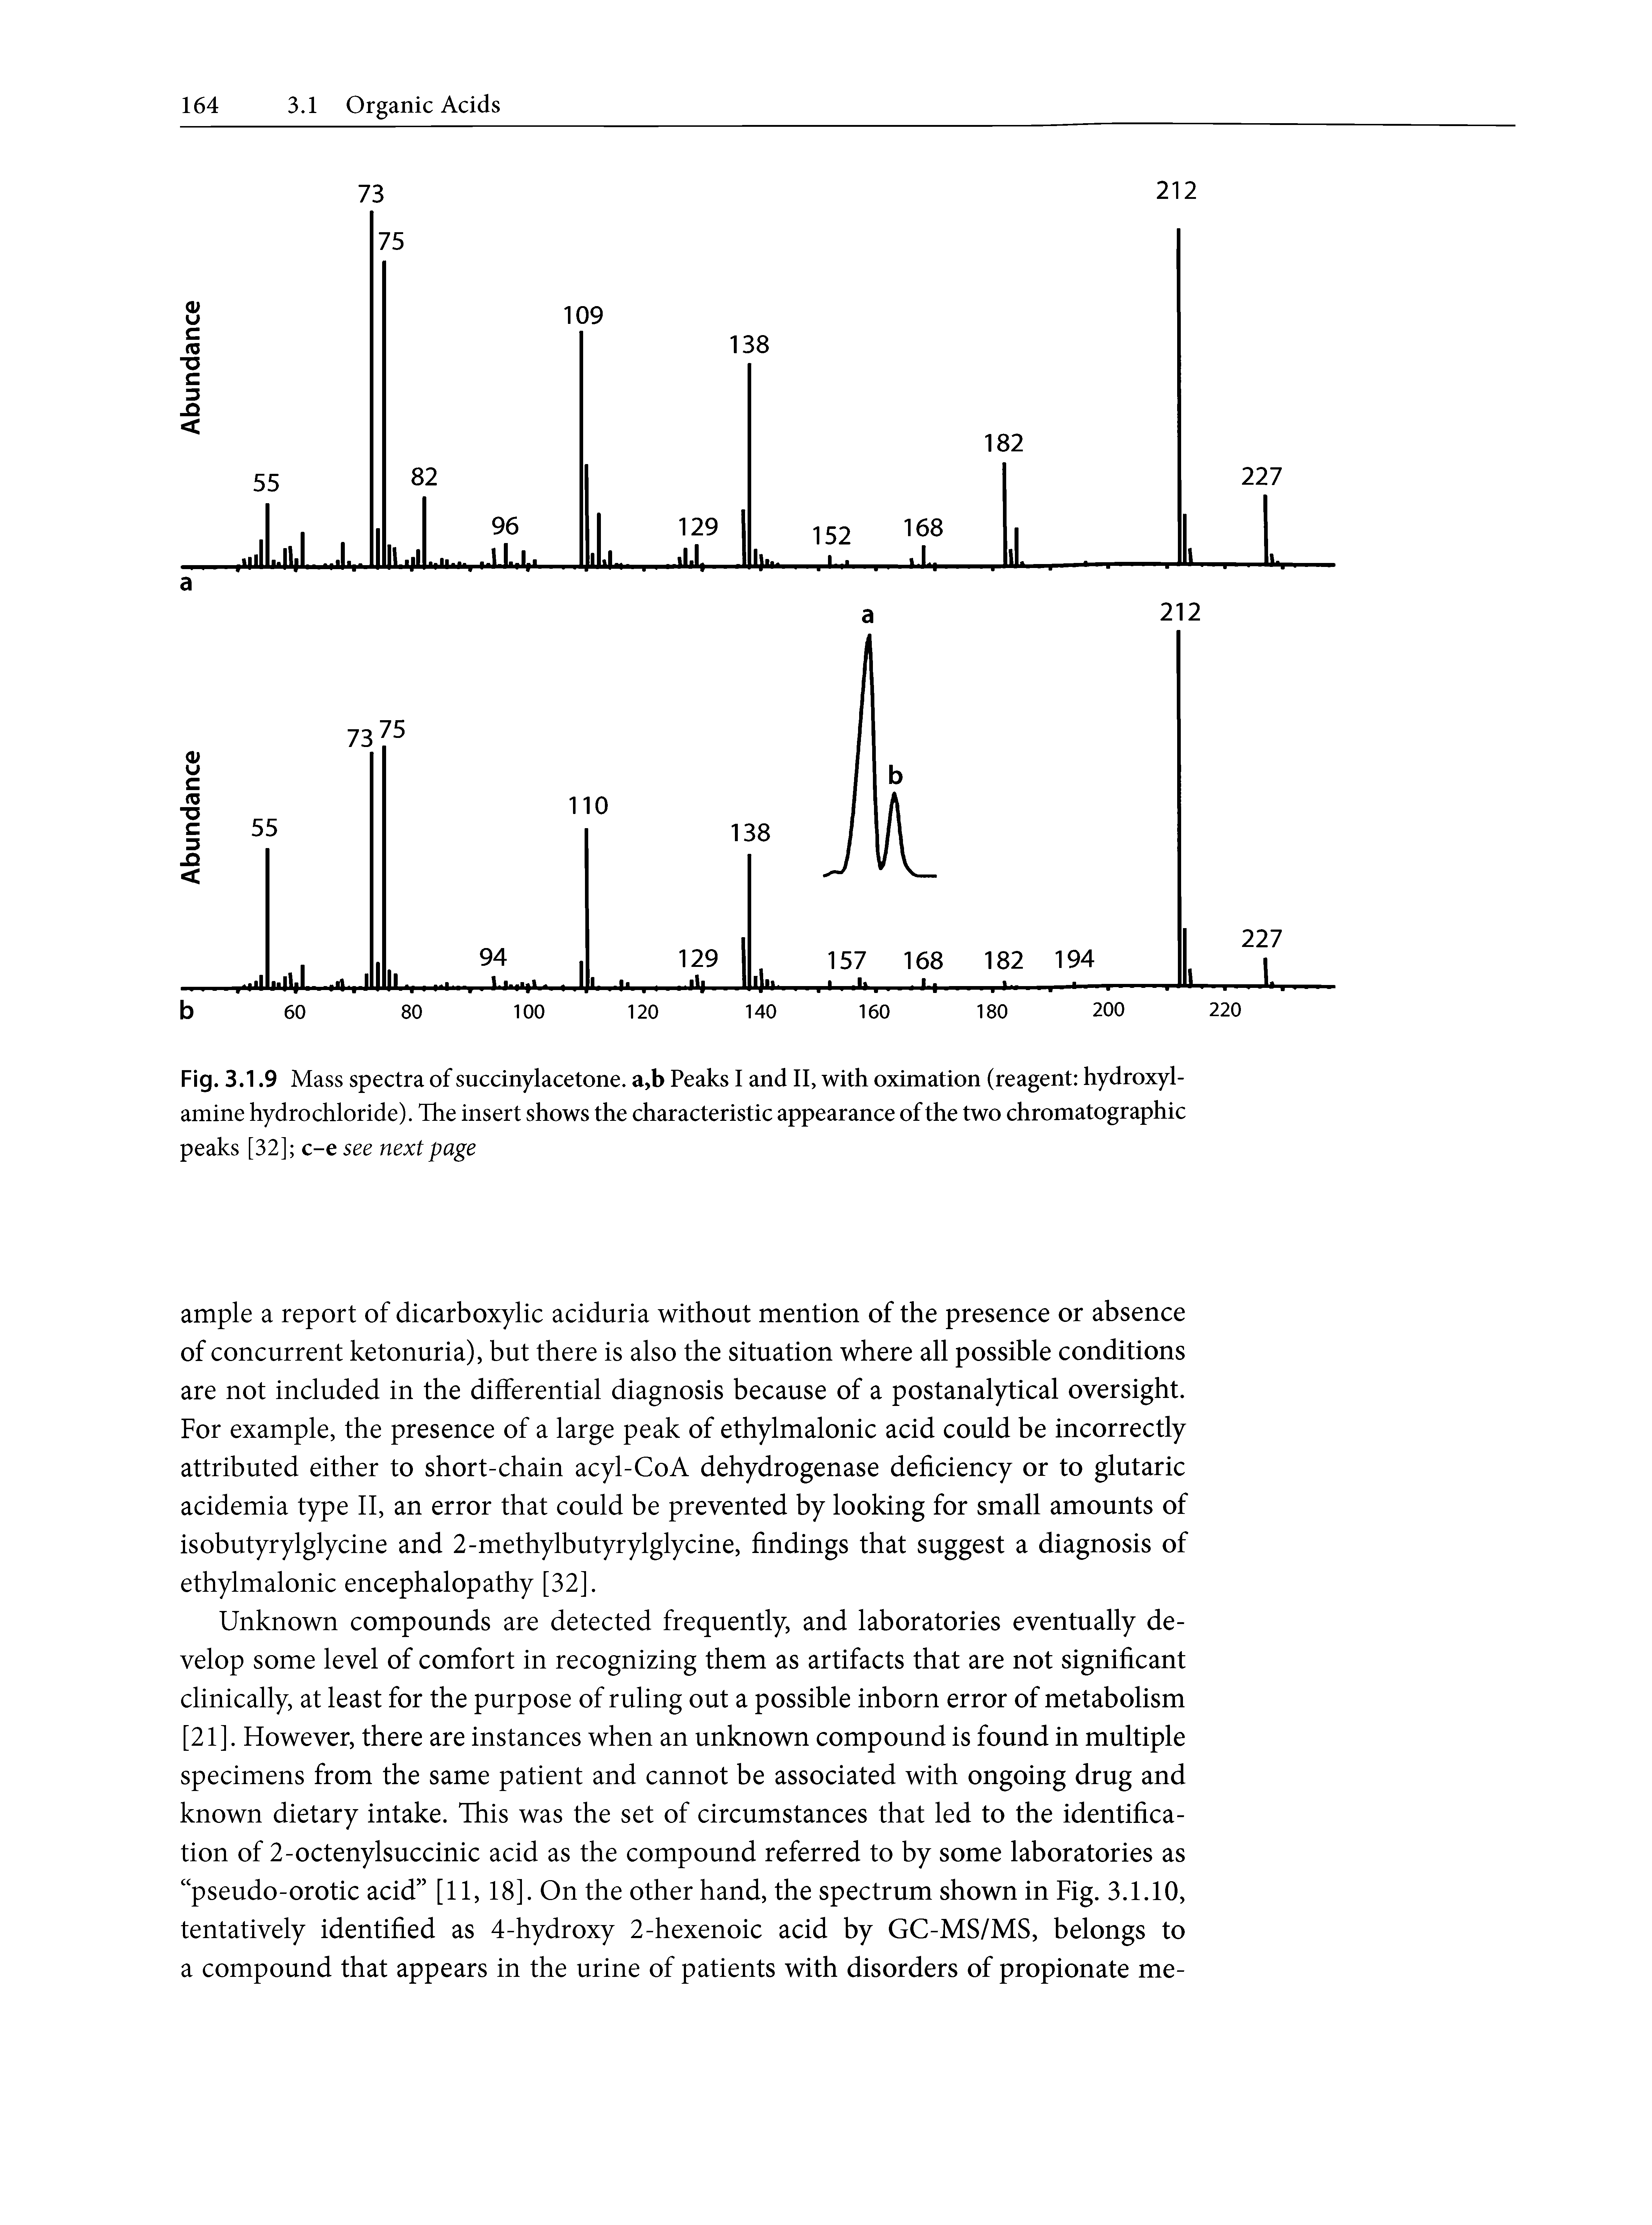 Fig. 3.1.9 Mass spectra of succinylacetone. a,b Peaks I and II, with oximation (reagent hydroxyl-amine hydrochloride). The insert shows the characteristic appearance of the two chromatographic peaks [32] c-e see next page...